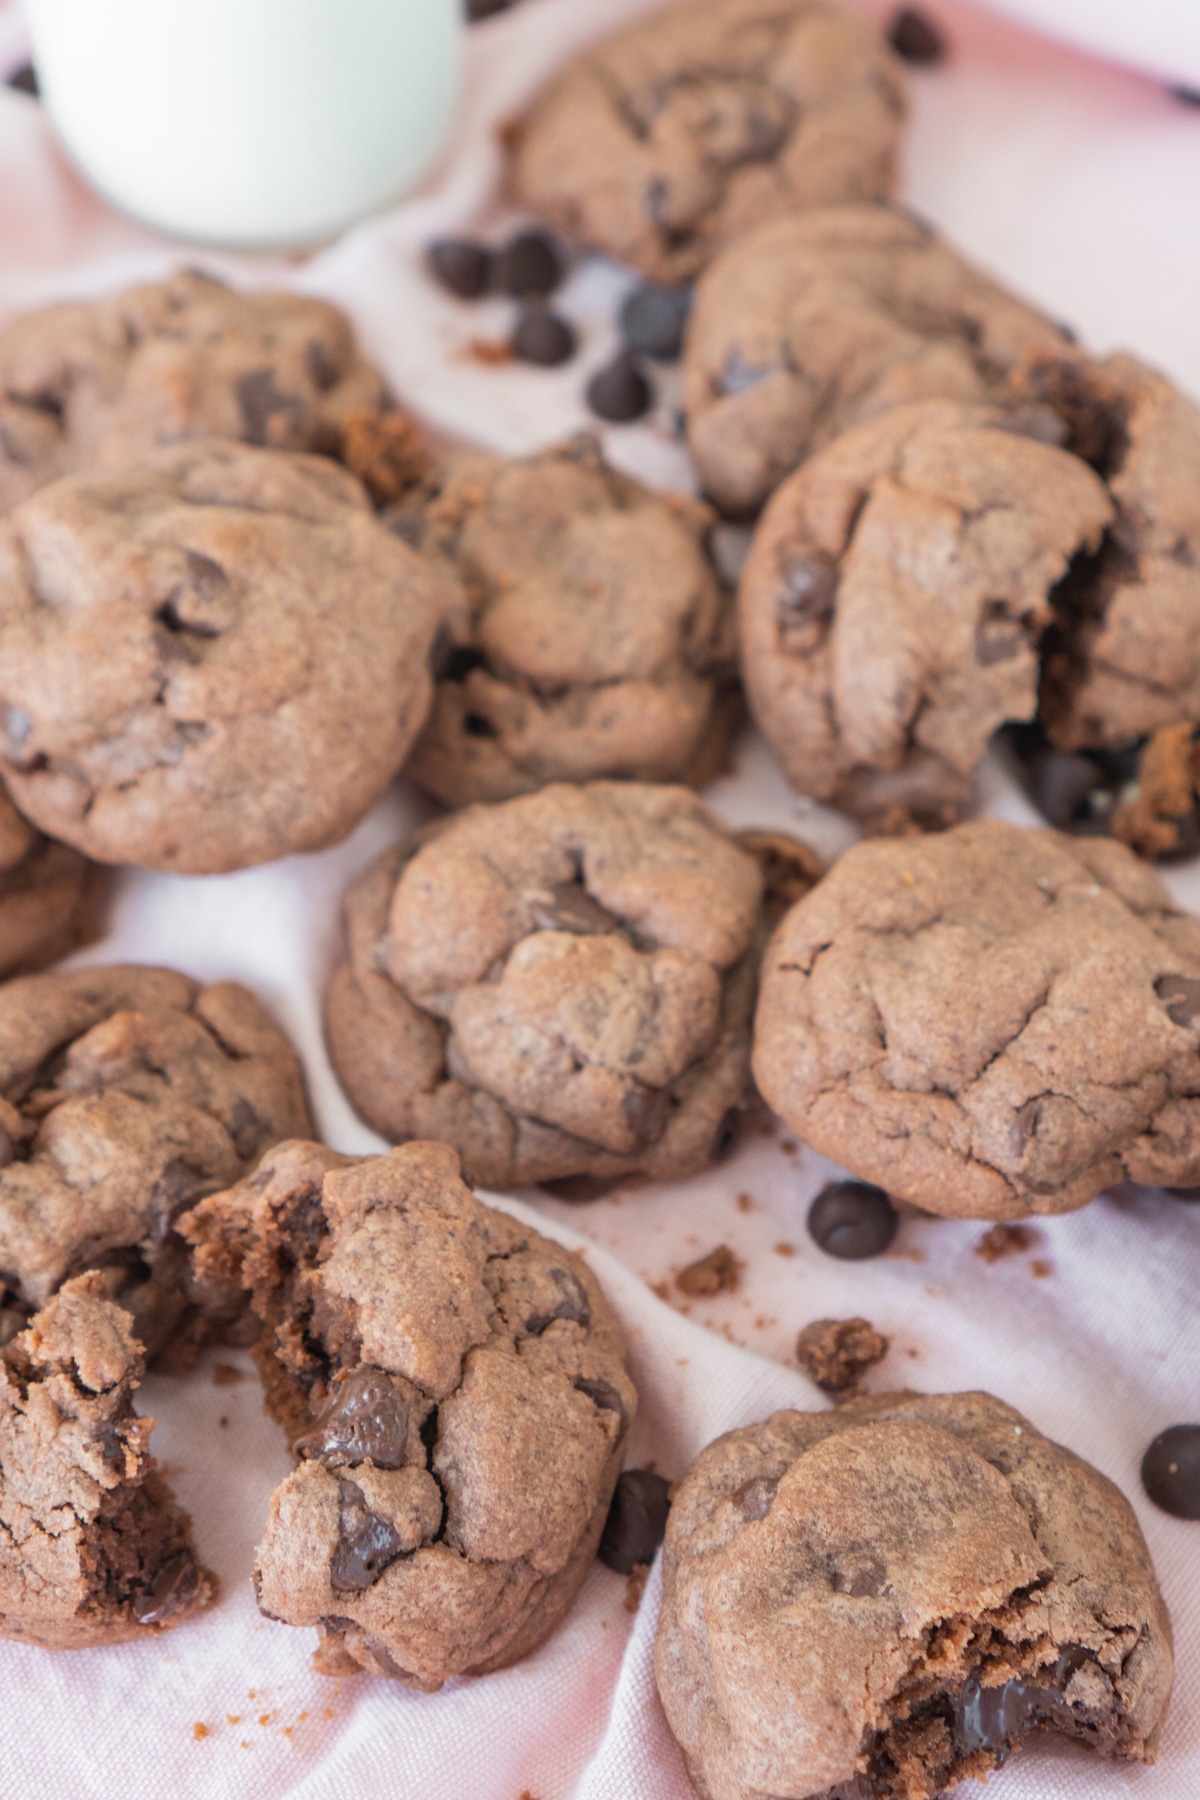 piles of chocolate chip pudding cookies